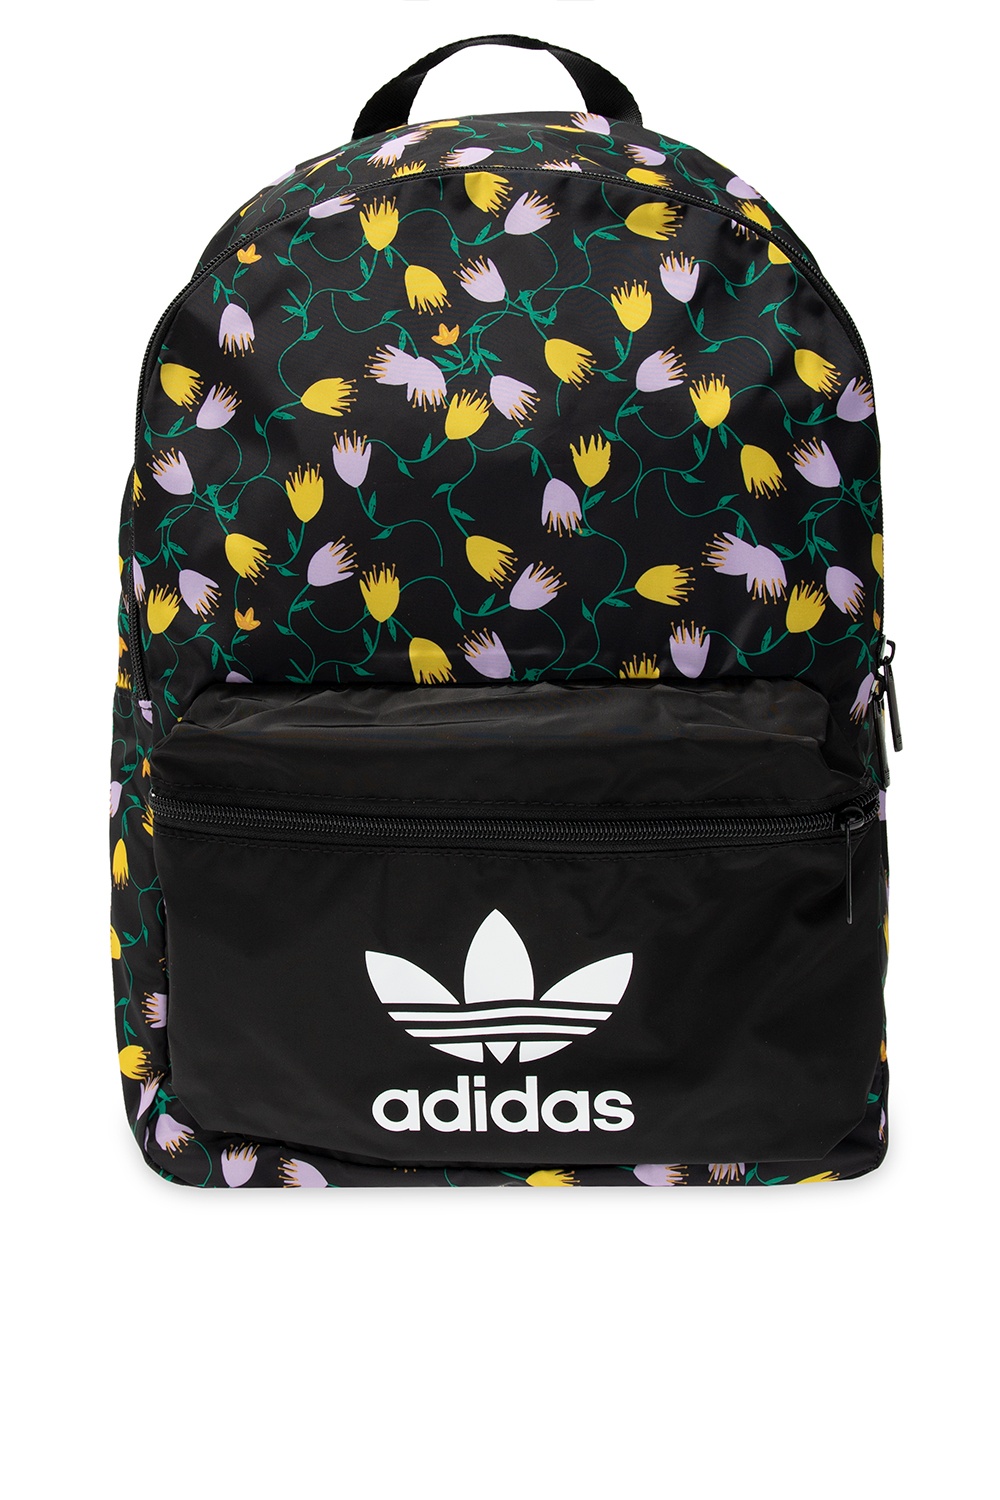 patterned adidas backpack